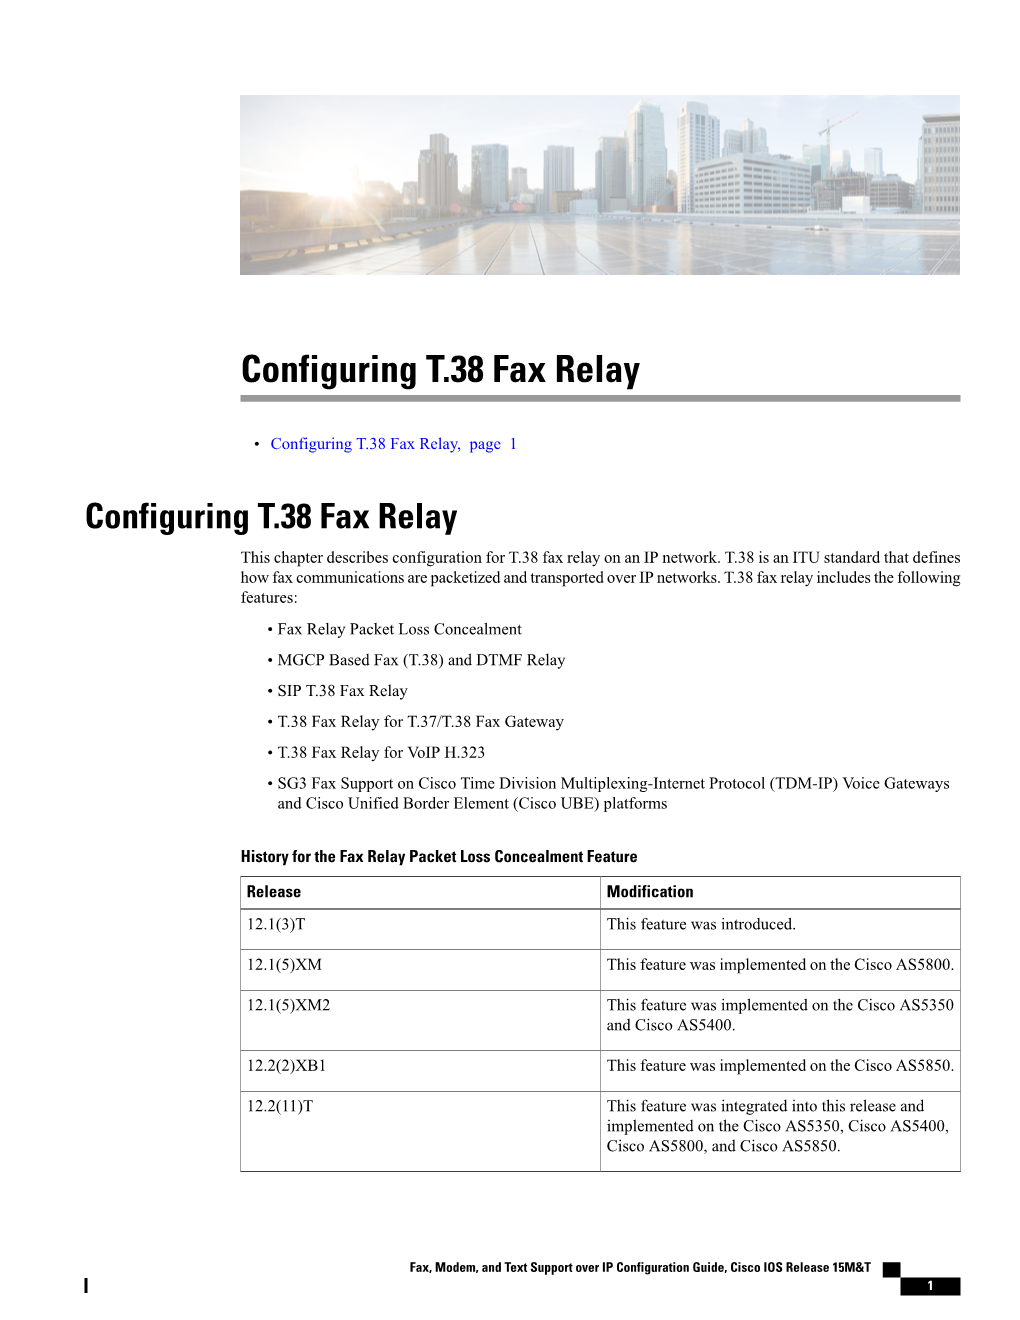 Configuring T.38 Fax Relay